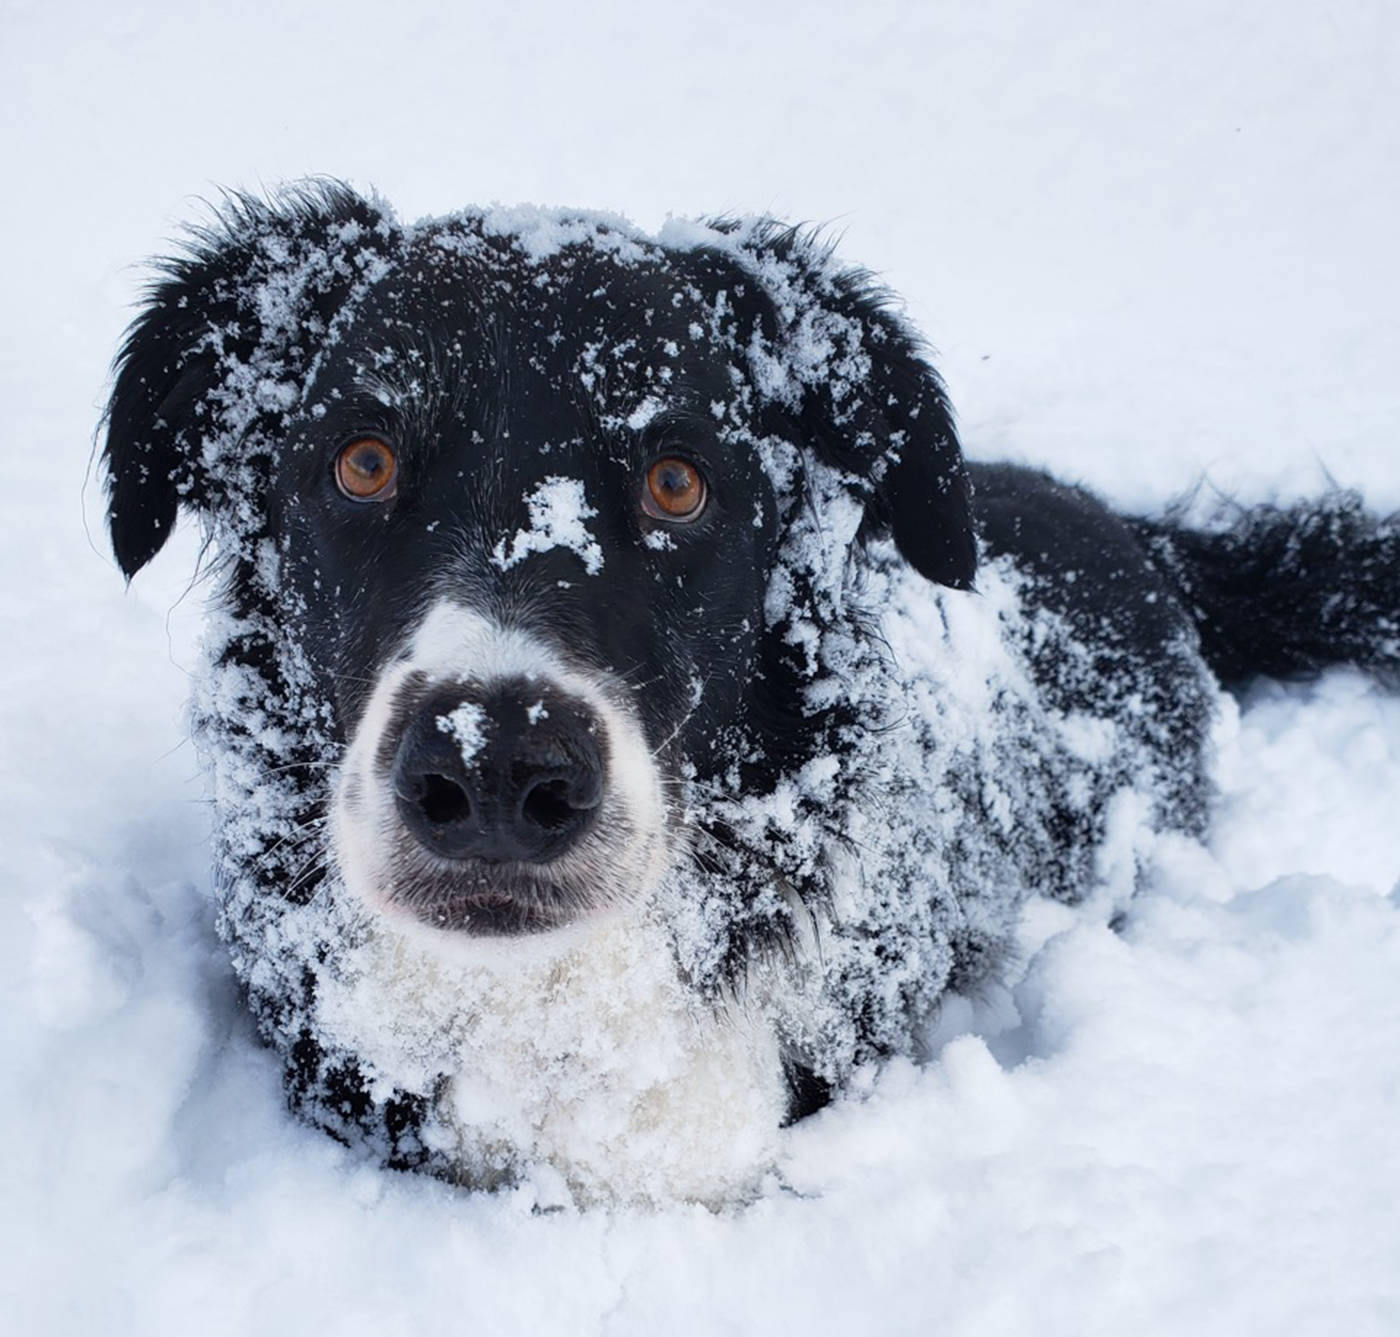 20194340_web1_Penny-the-dog-in-the-snow